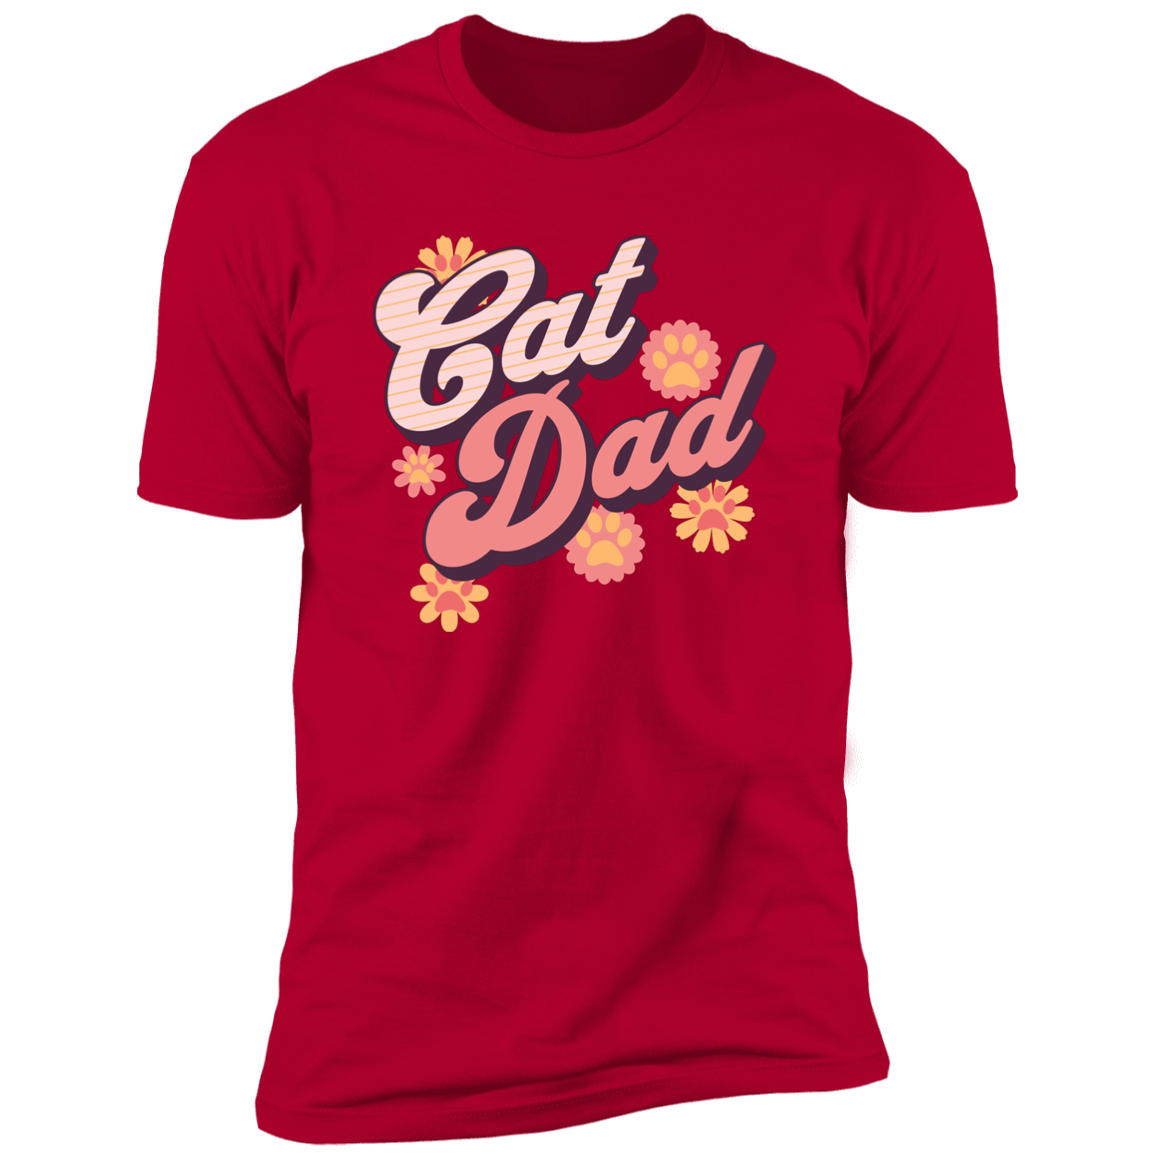 Cat Dad Retro T-shirt, Cat Dad Shirt for humans, in red